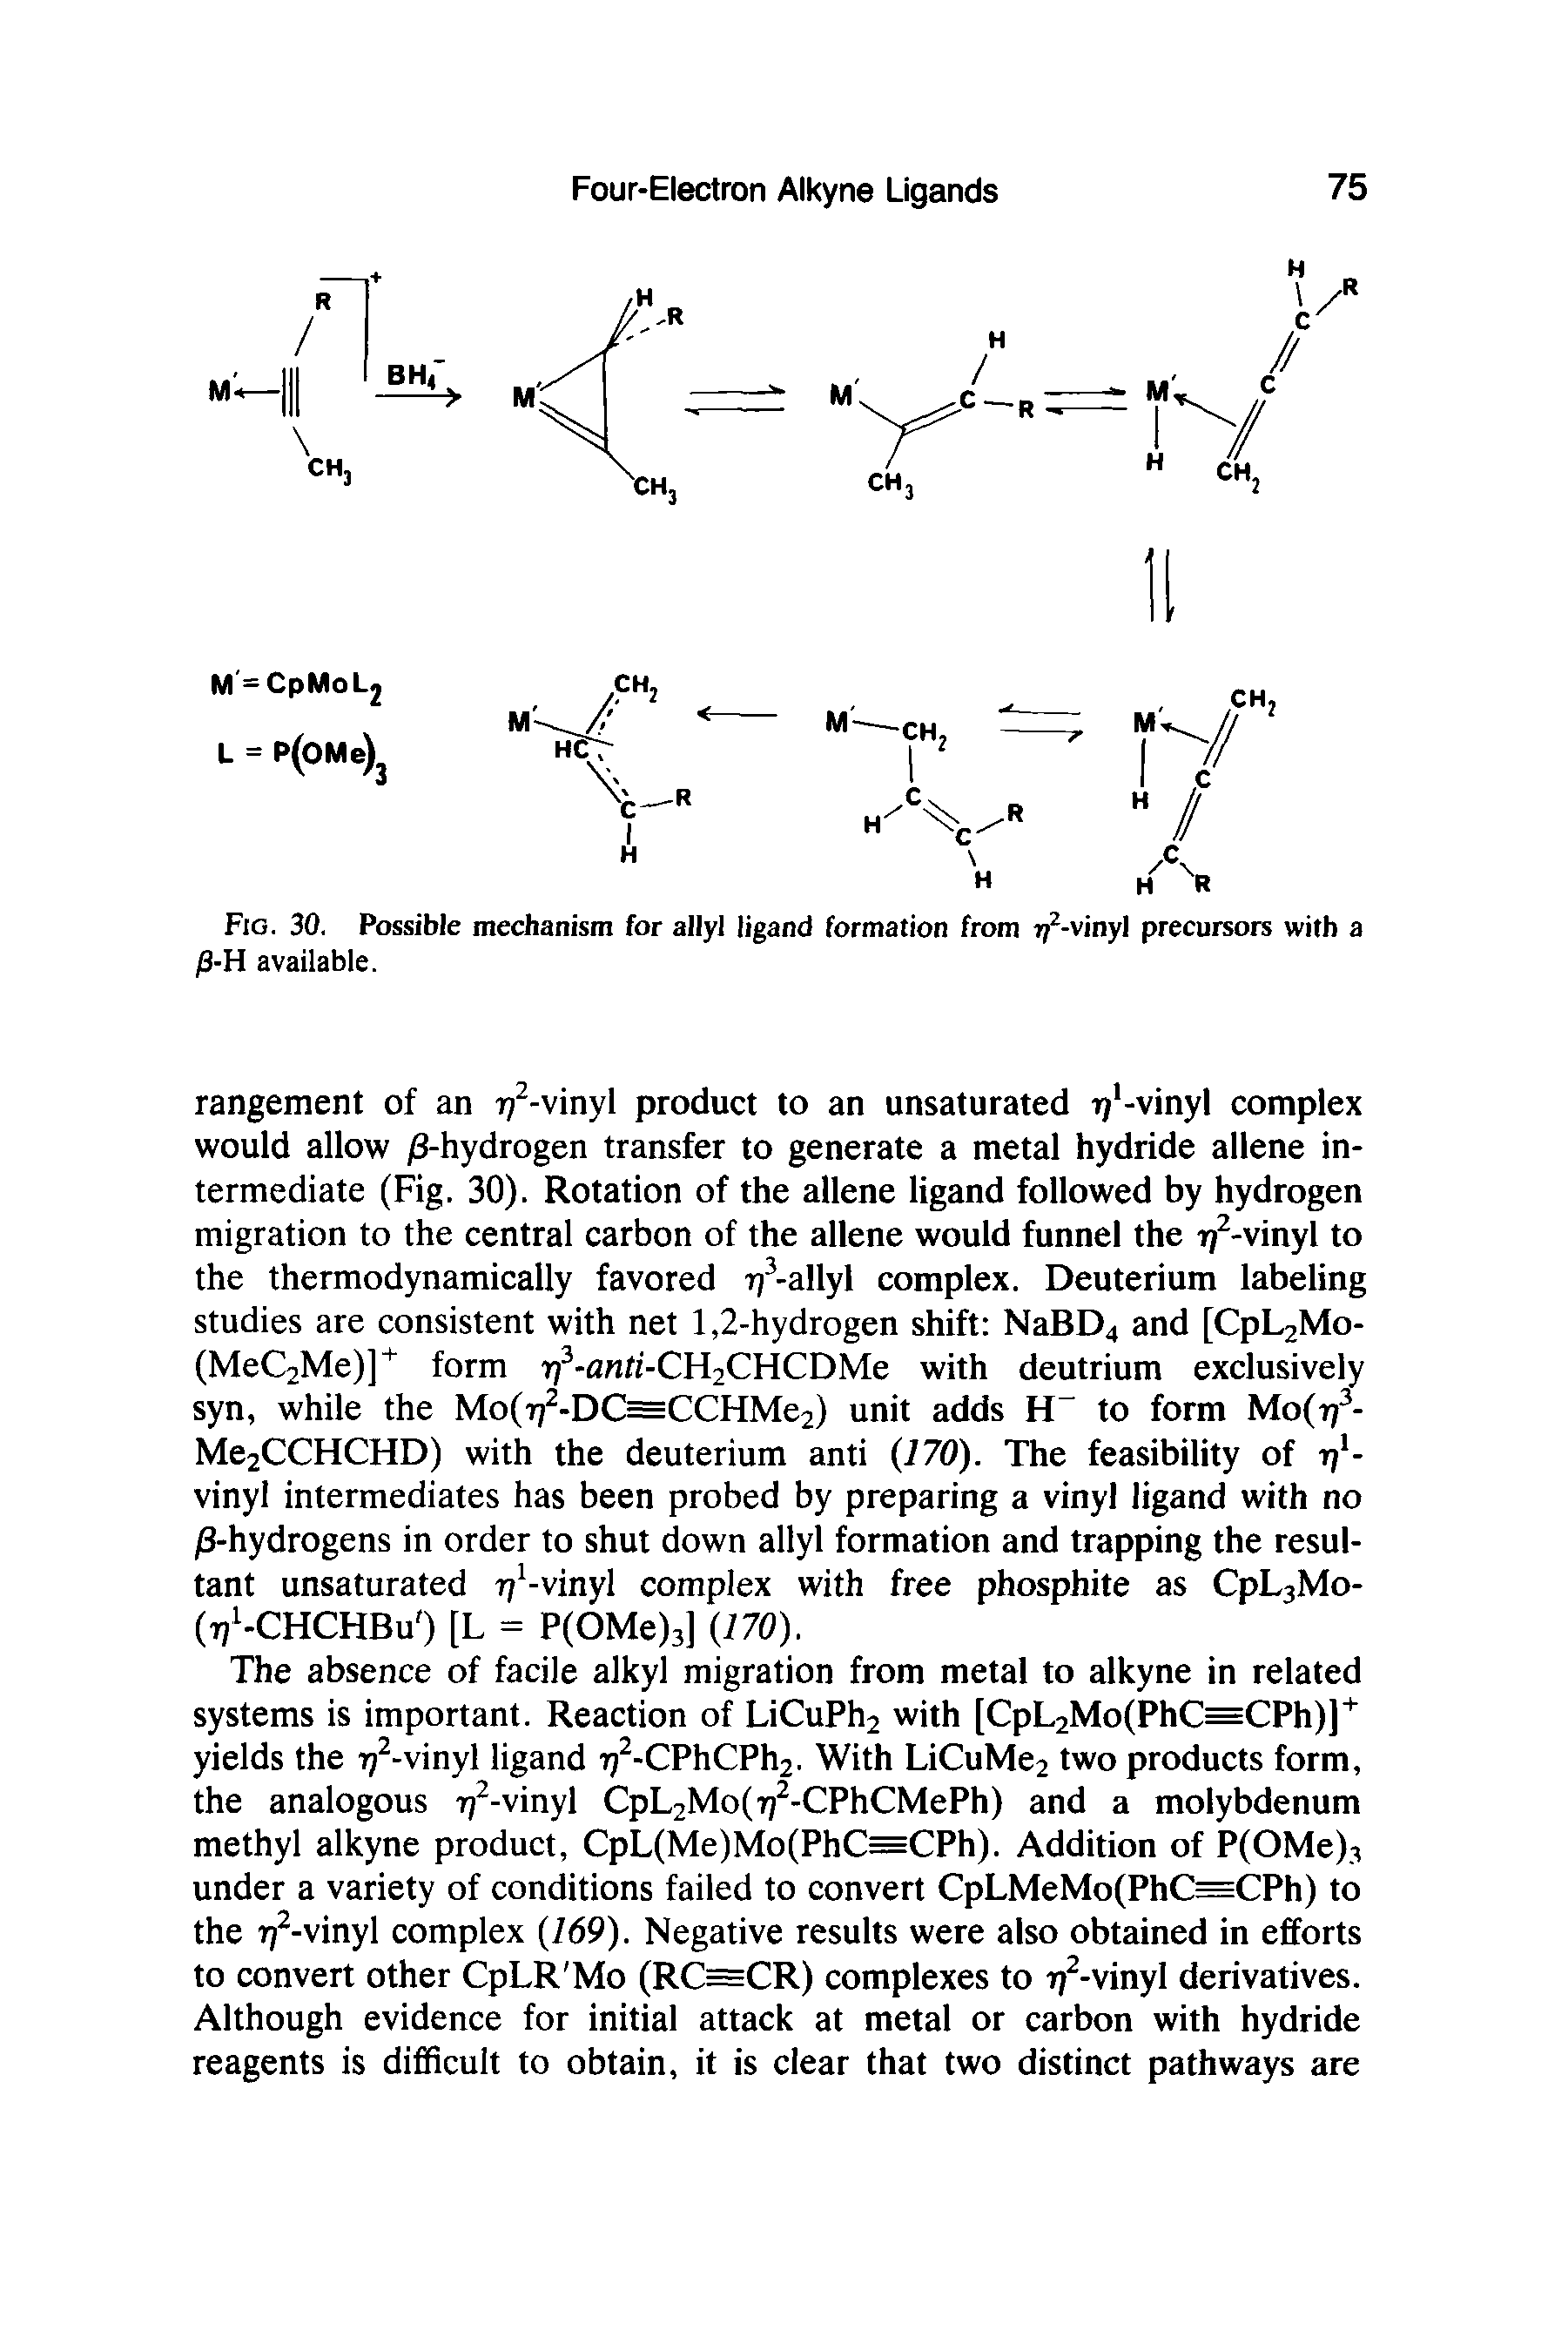 Fig. 30. Possible mechanism for allyl ligand formation from r/2-vinyl precursors with a /3-H available.